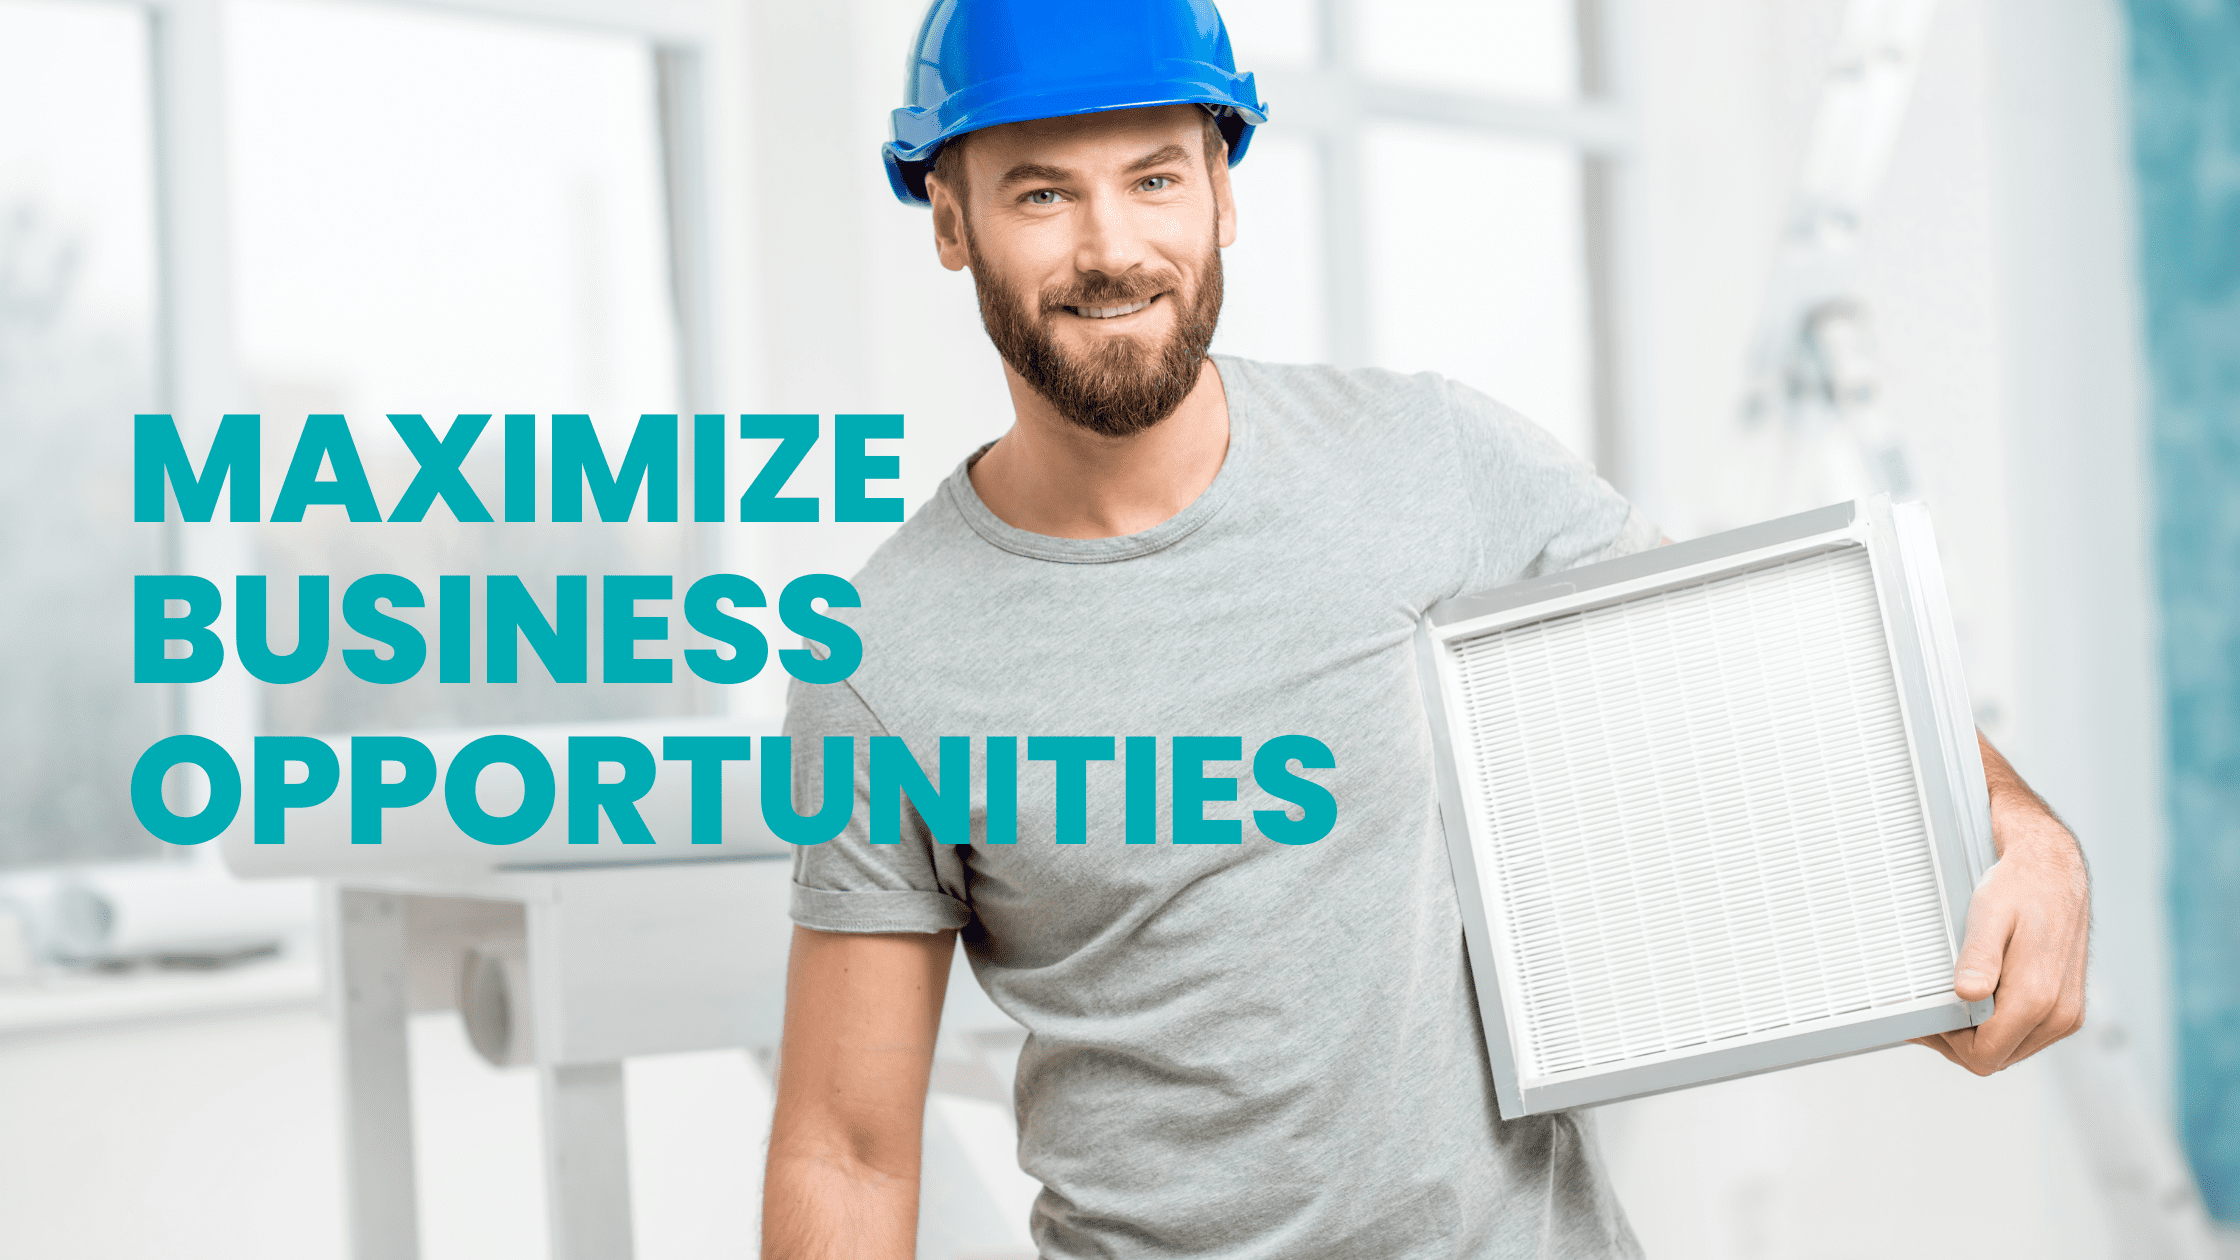 Maximize business opportunities with MERV 13 filters